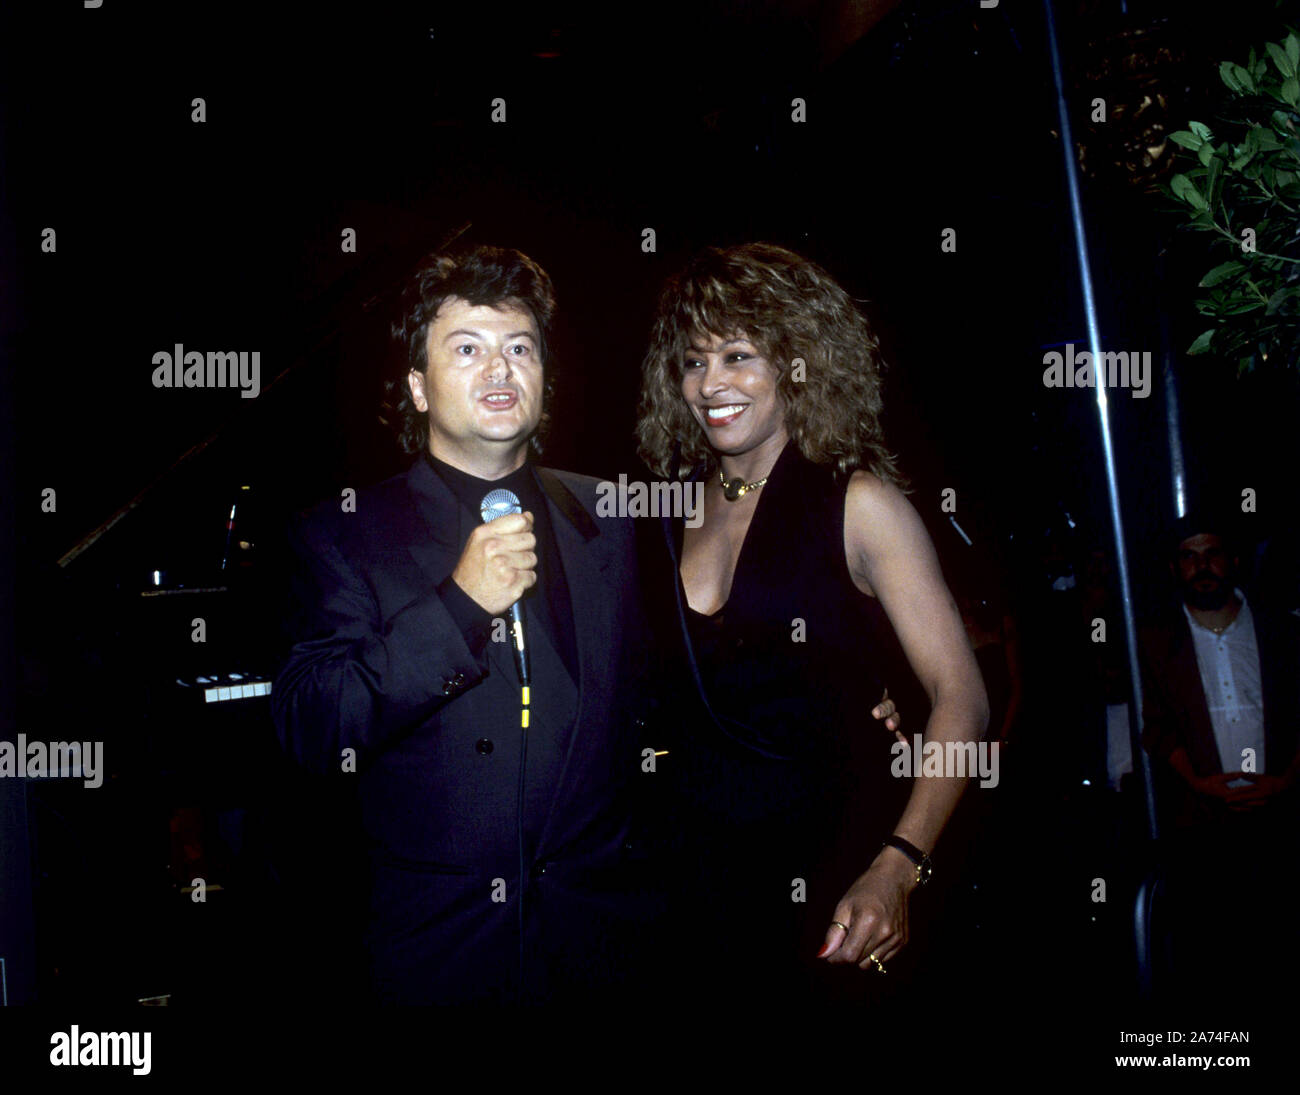 Tina Turner with Helmut Fest, head of the record company Emi-Elektrola in Germany, at the presentation of her record 'Foreign Affair' on 31 August 1989 in Cologne. Tina Turner was born on 26 November 1939 in Nutbush (Tennessee). | usage worldwide Stock Photo